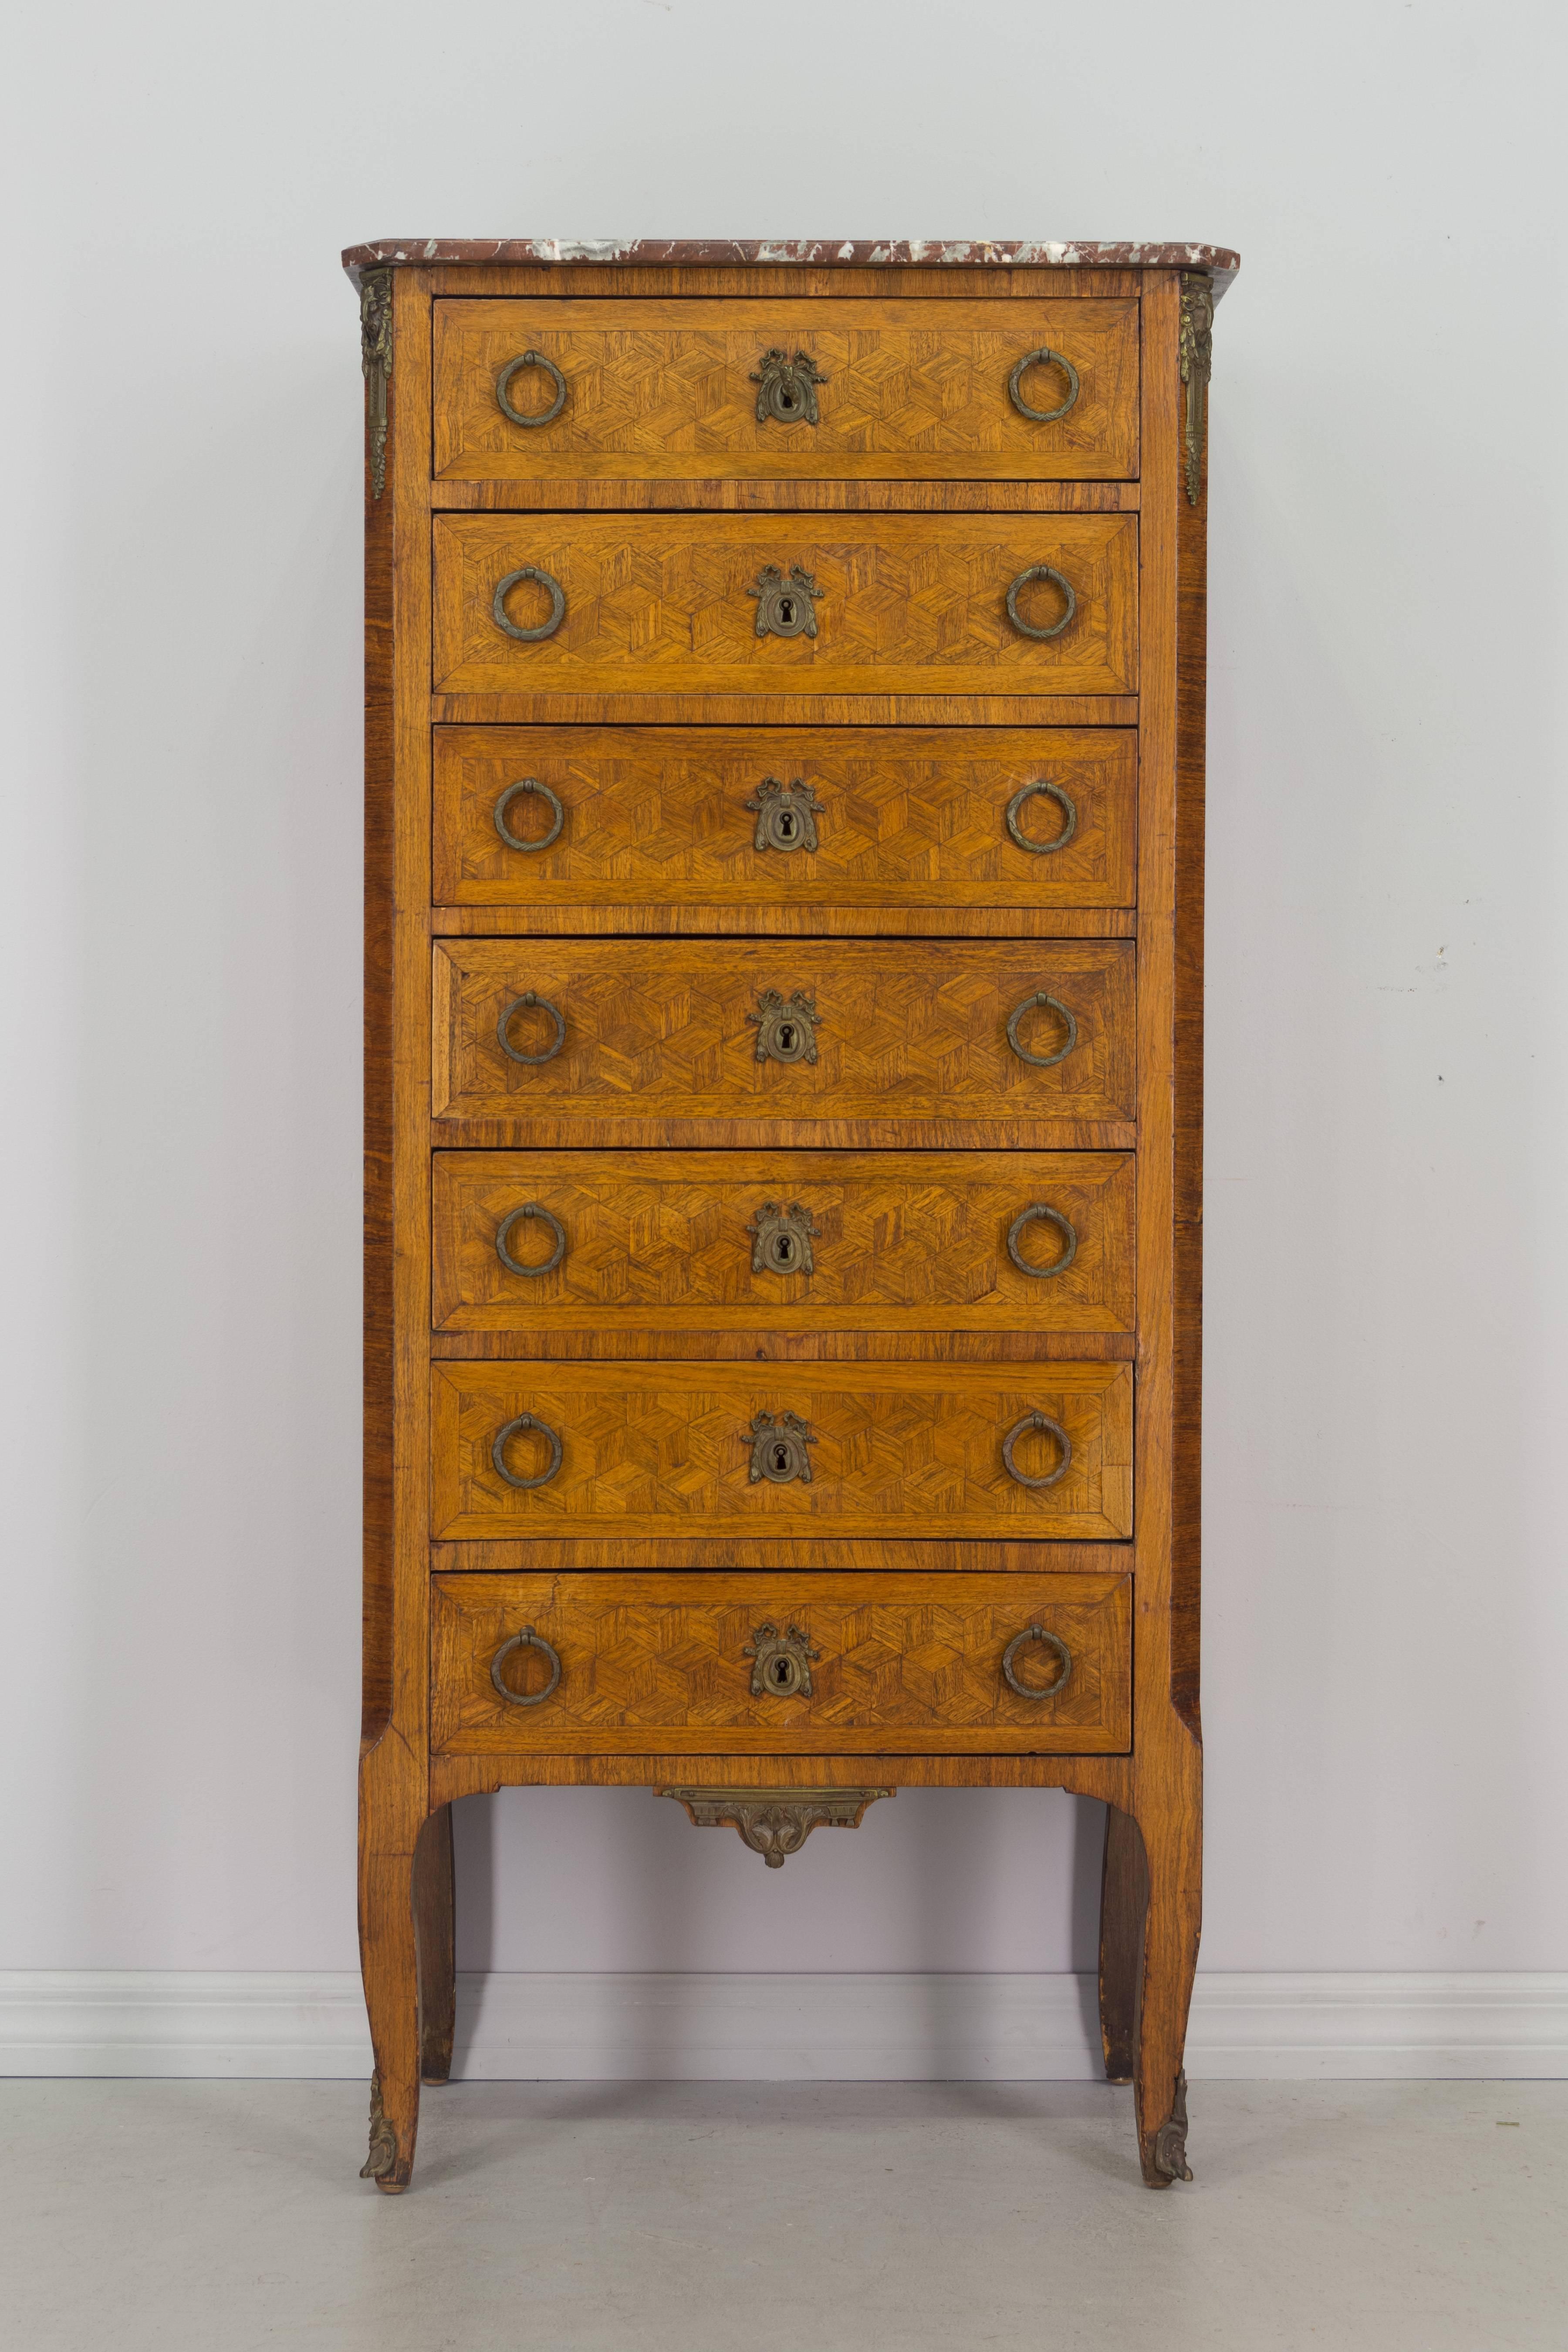 French Louis XVI style semainier or tall chest of seven drawers, made of inlaid veneer of mahogany and walnut with bronze hardware and marble top. All original. Minor veneer losses.